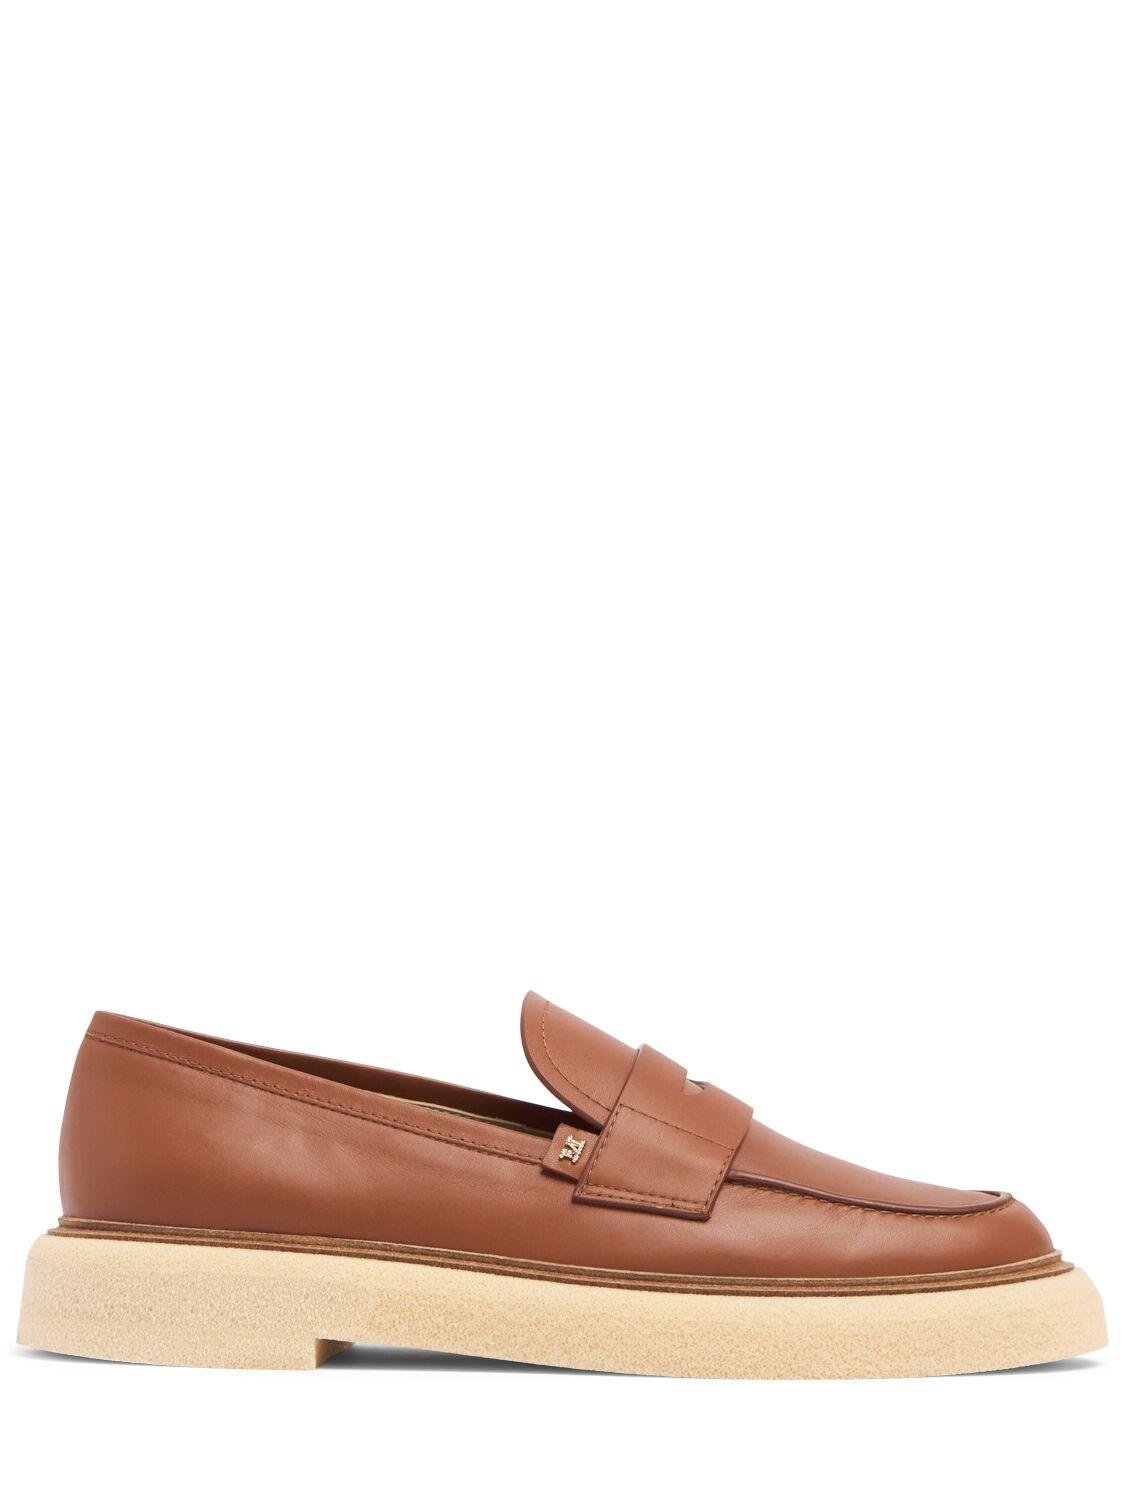 30mm Rough Leather Loafers by MAX MARA